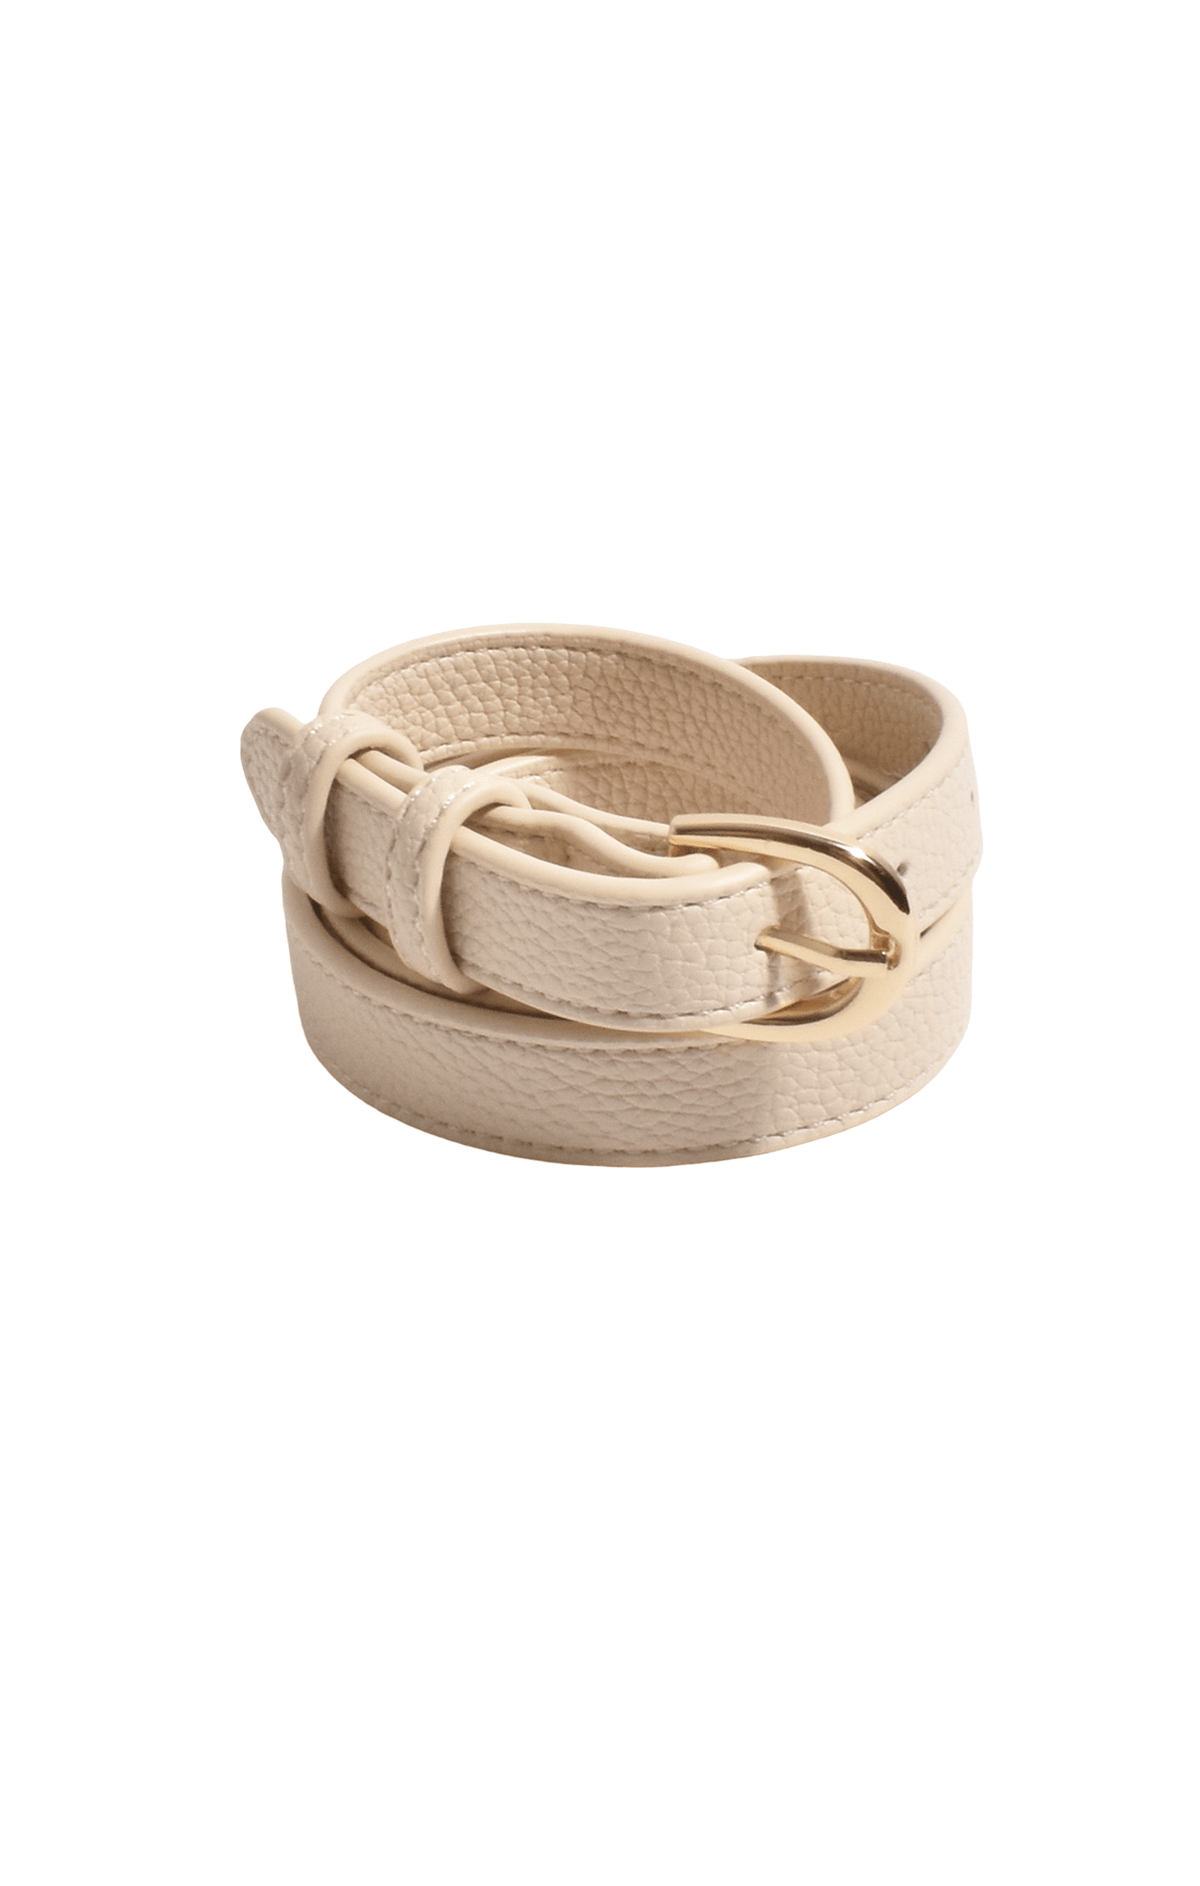 Belts OS / CREAM KEELY THIN JEANS BELT IN CREAM